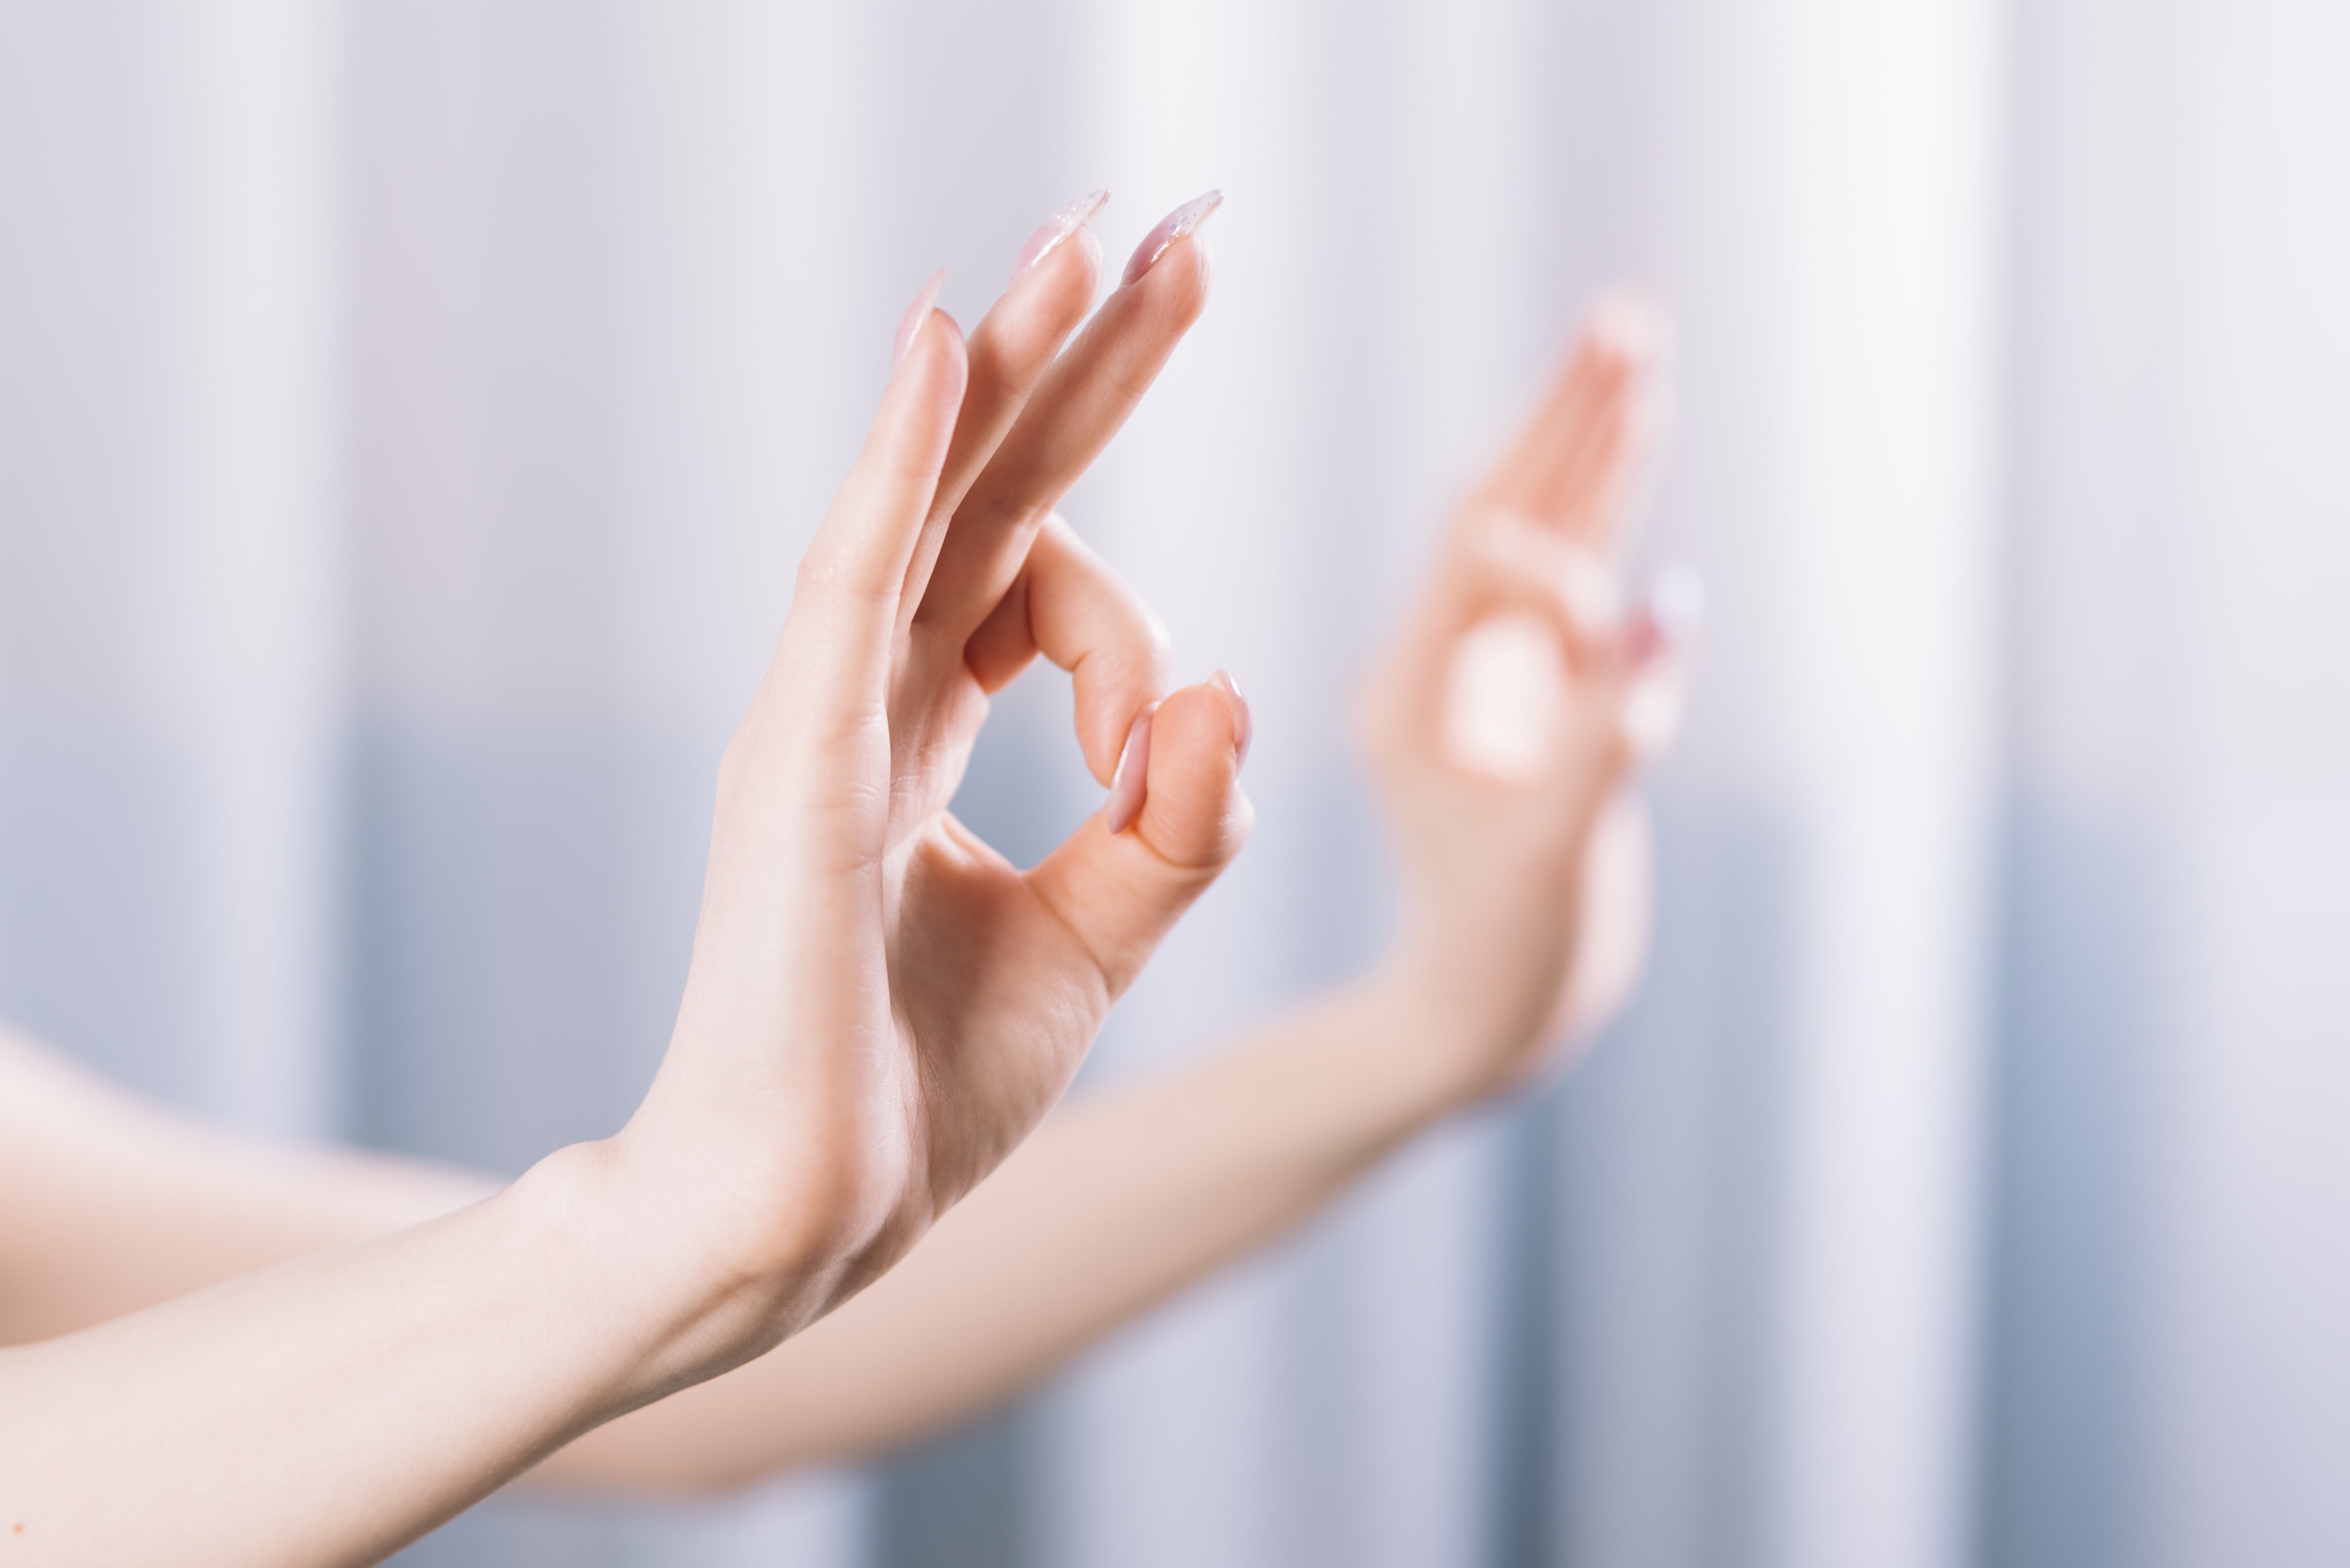 The Significance of Mudras